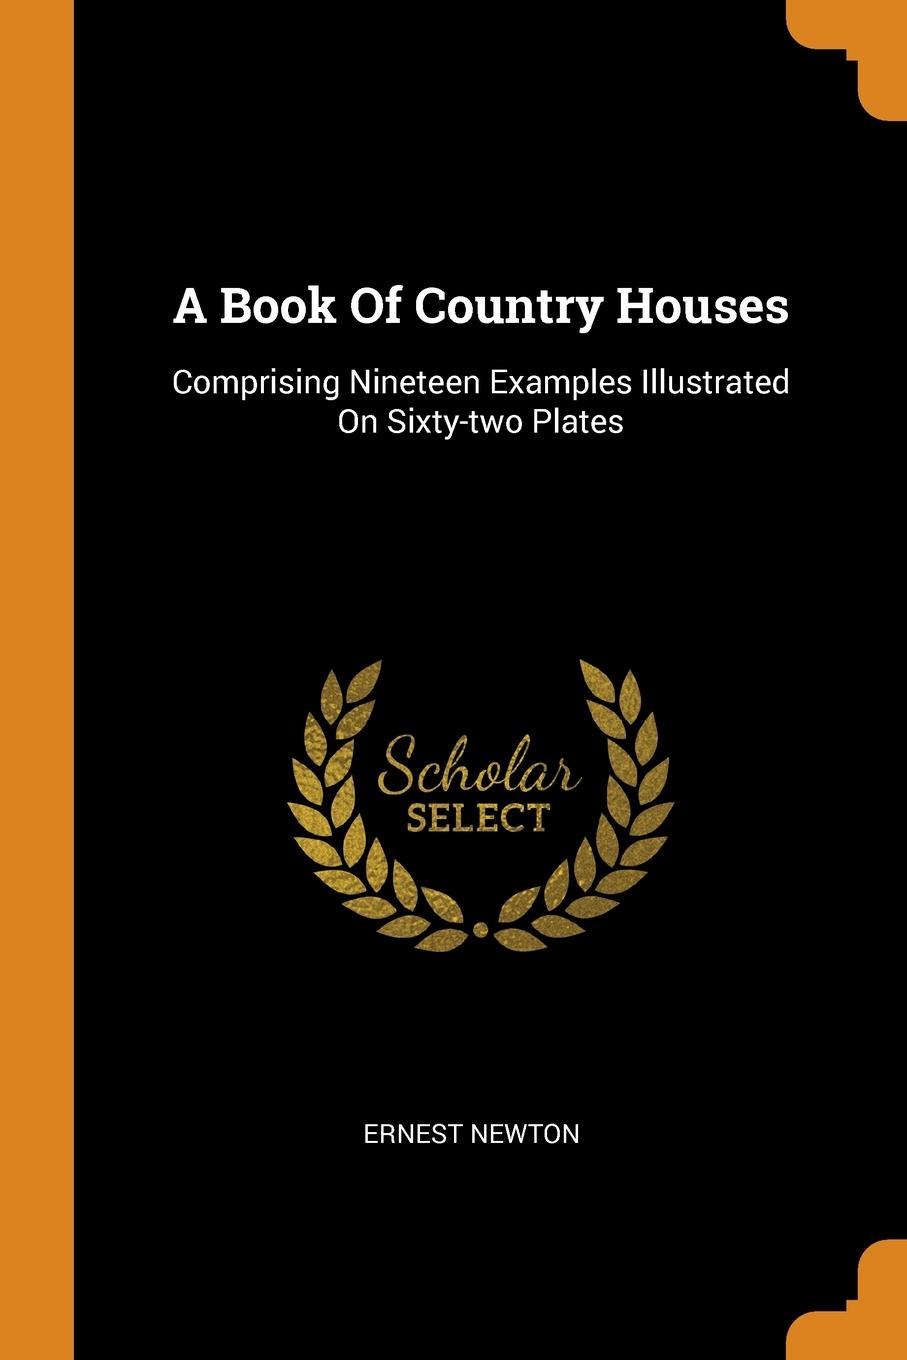 A Book Of Country Houses. Comprising Nineteen Examples Illustrated On Sixty-two Plates